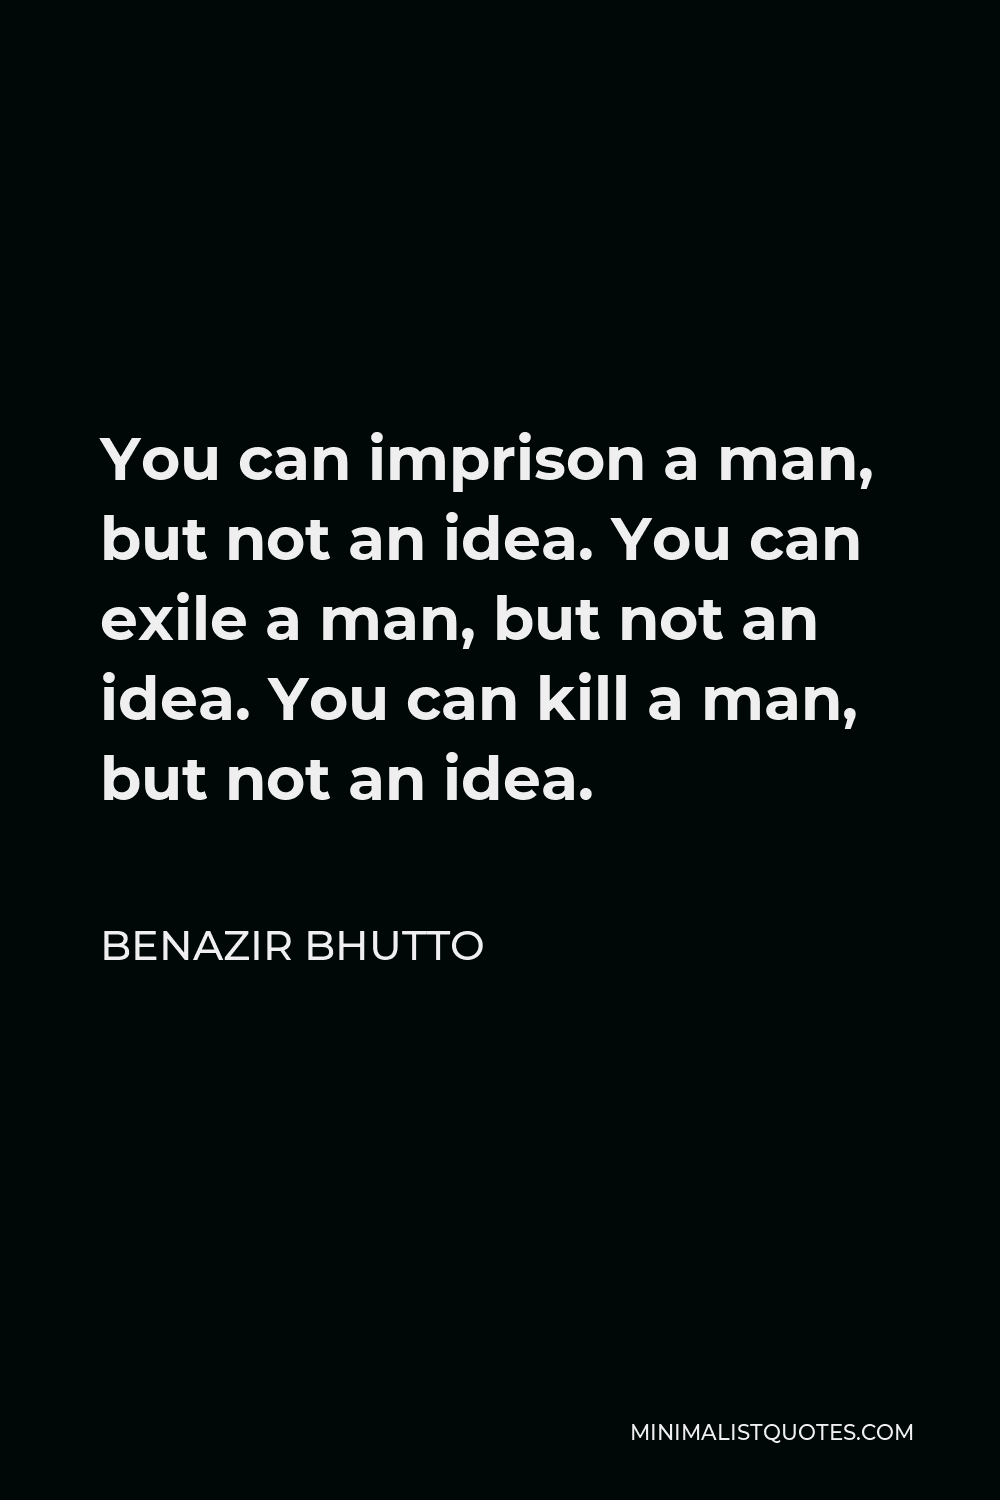 Benazir Bhutto Quote - You can imprison a man, but not an idea. You can exile a man, but not an idea. You can kill a man, but not an idea.